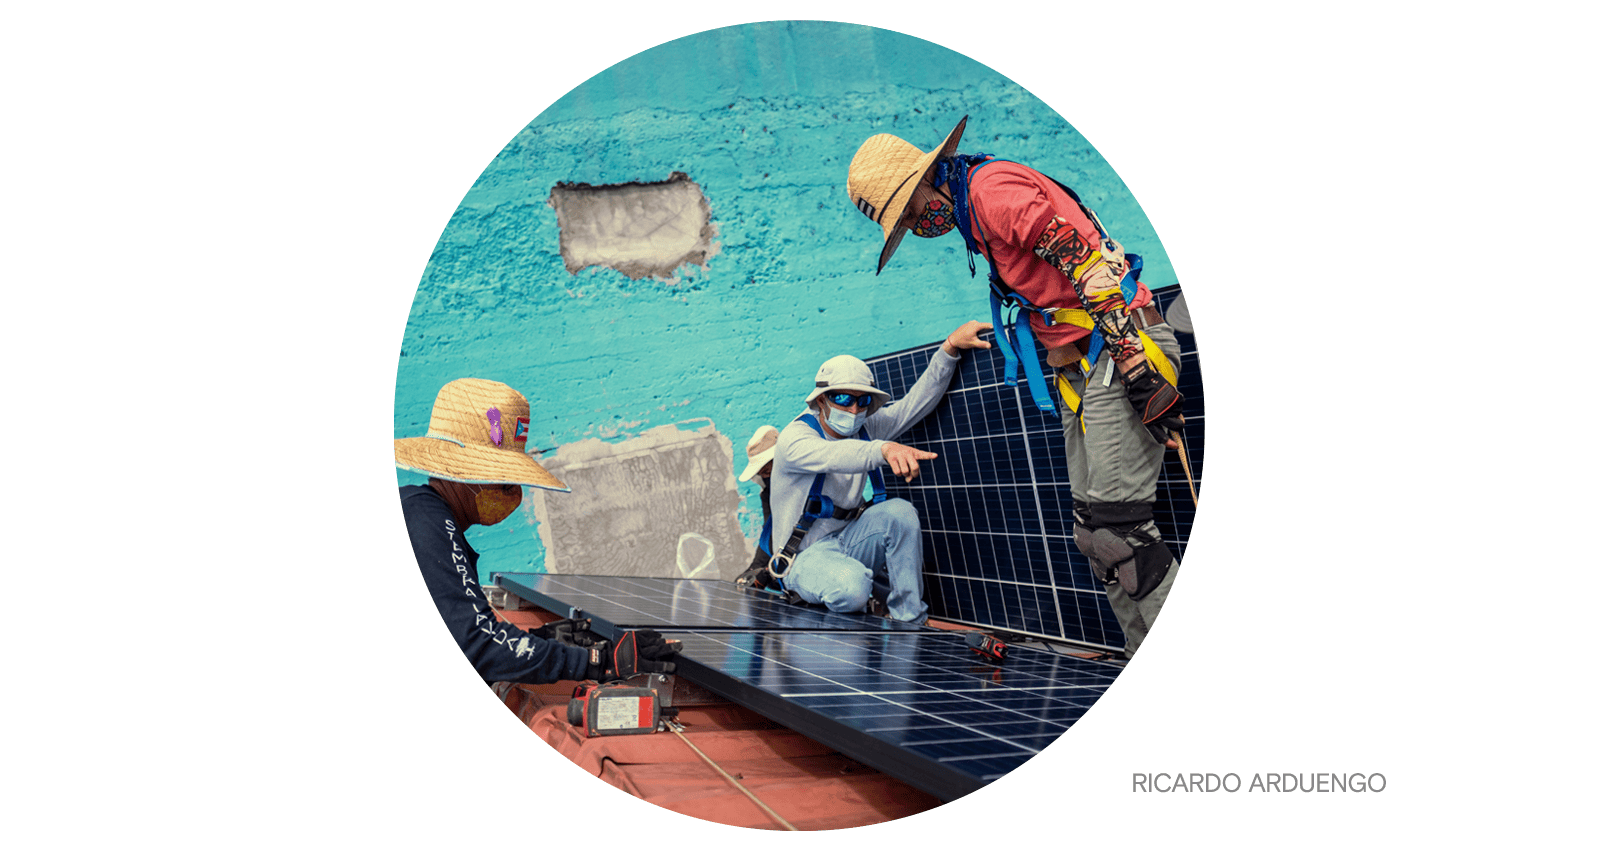 Workers install the solar microgrid in Adjuntas